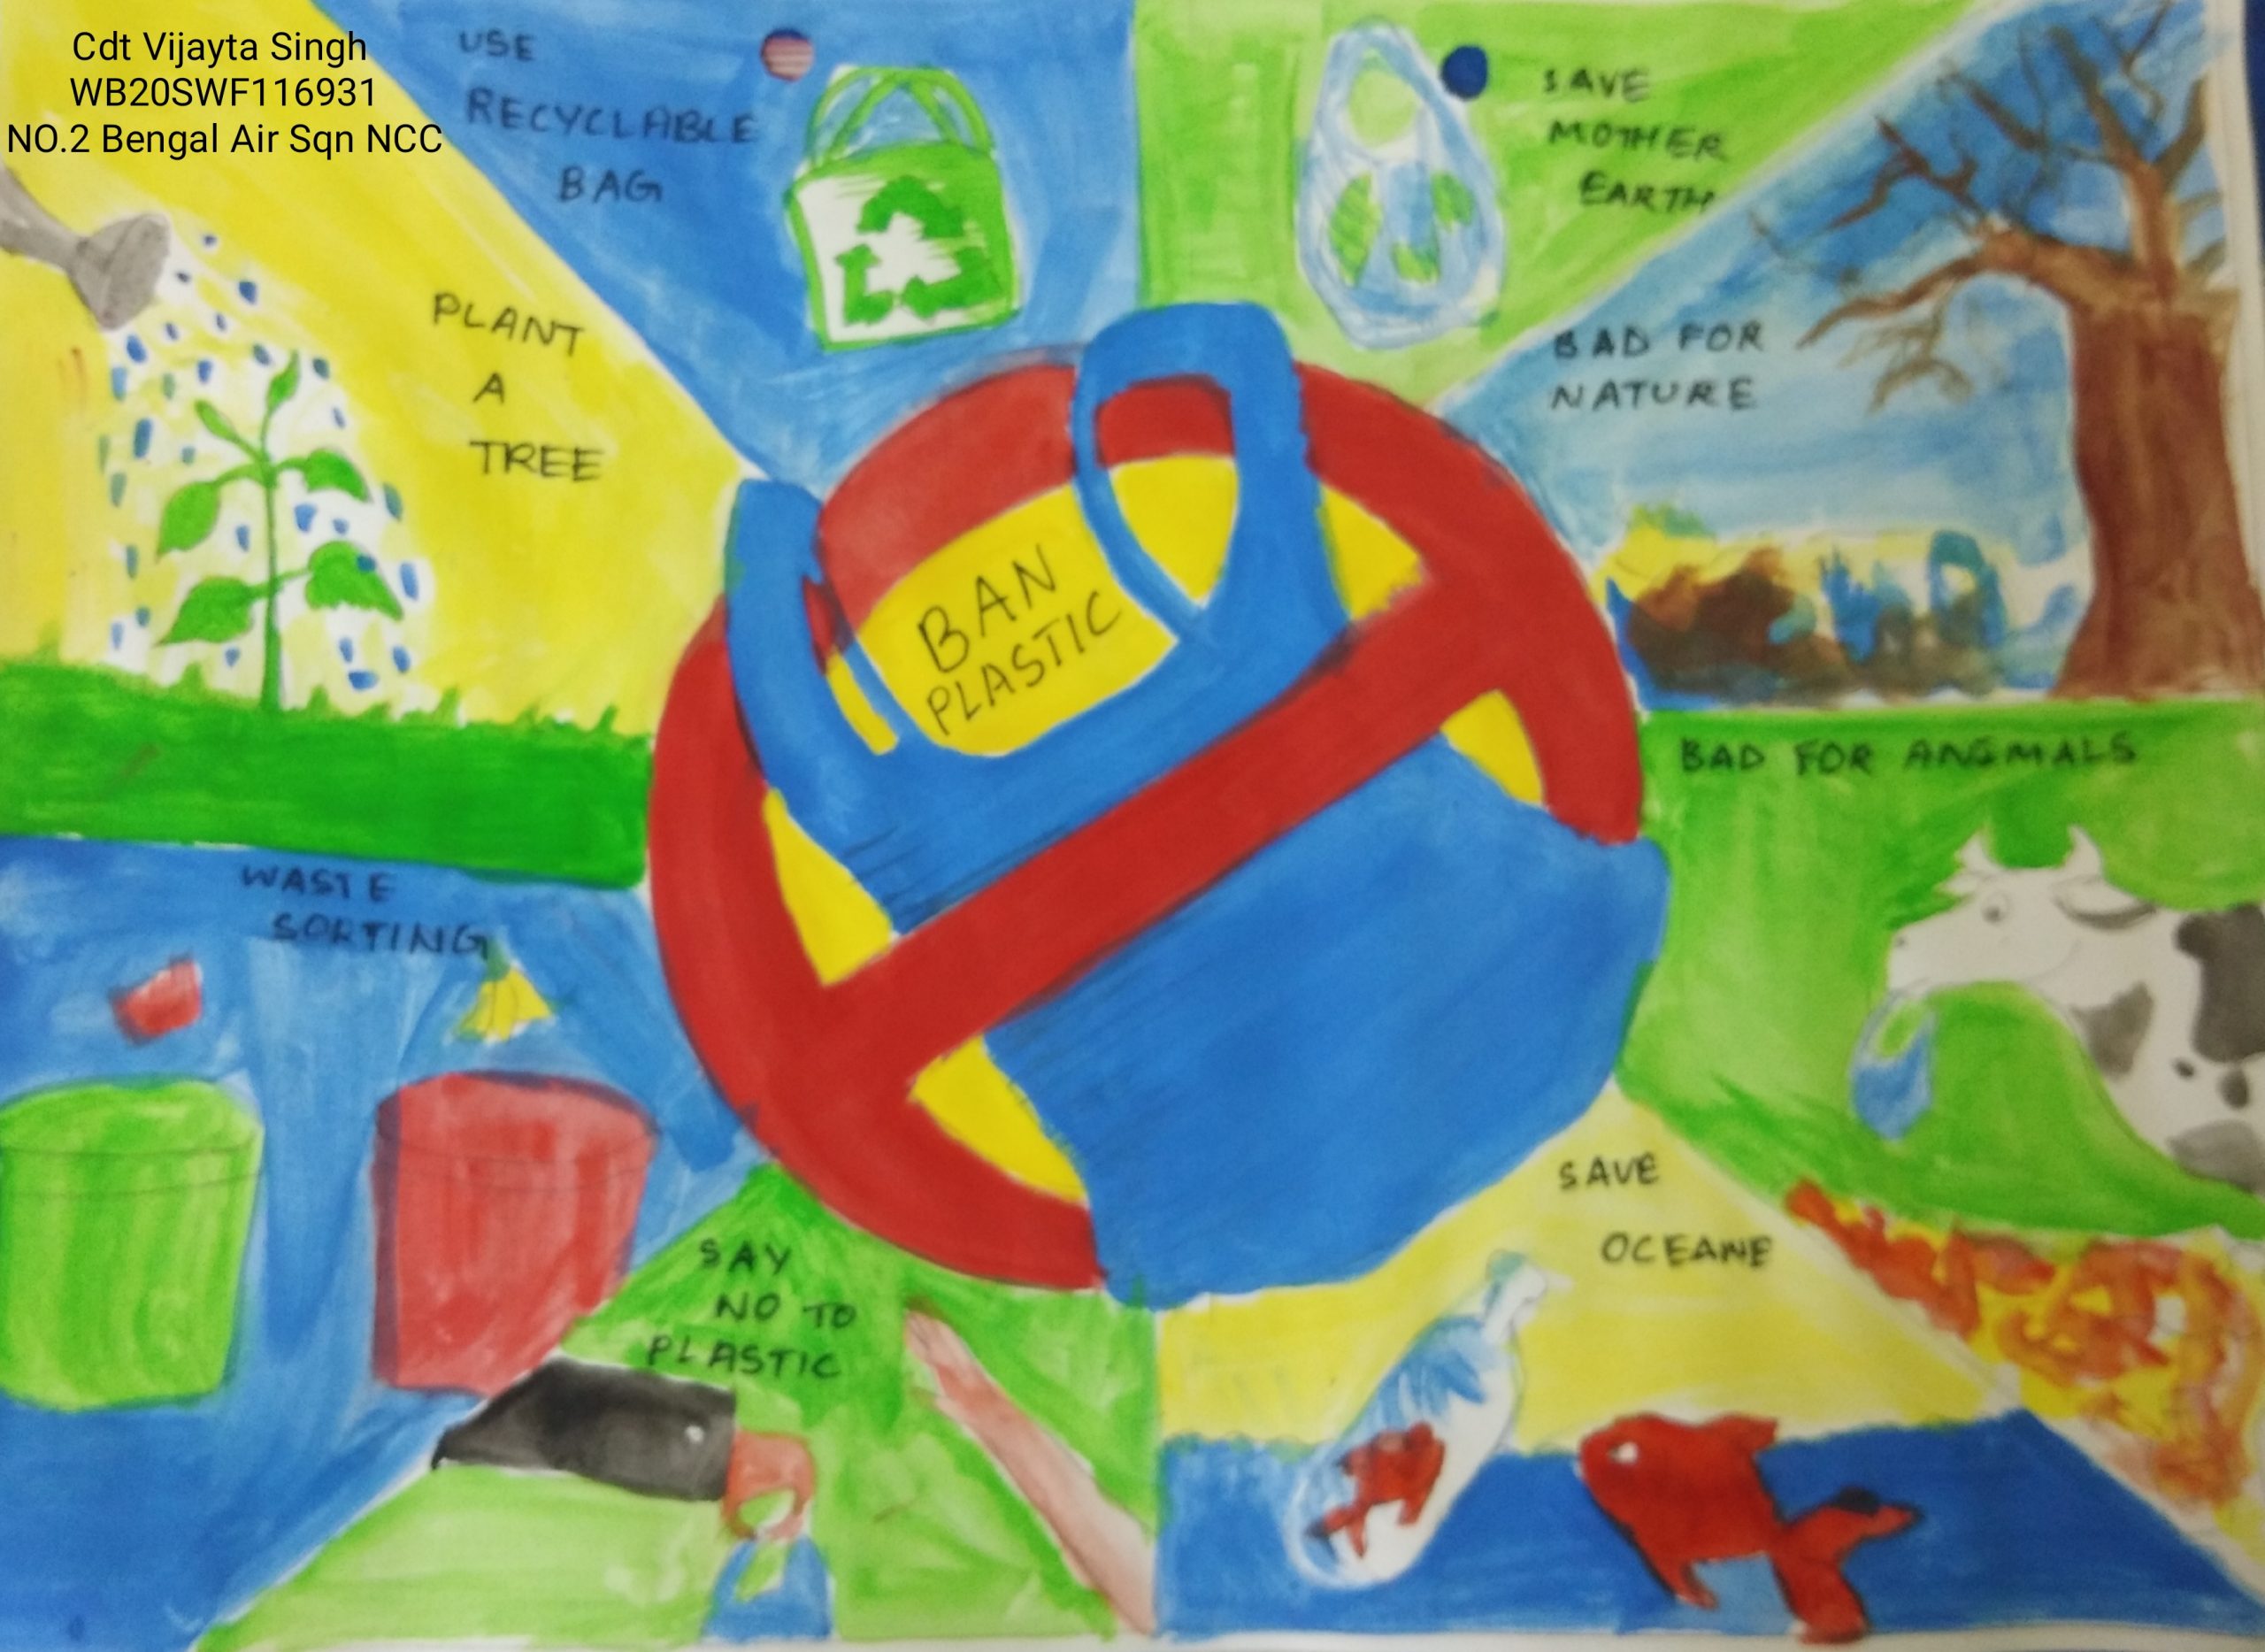 How to draw stop plastic pollution poster chart for school students - ve...  | Poster drawing, Handmade poster, Recycle poster